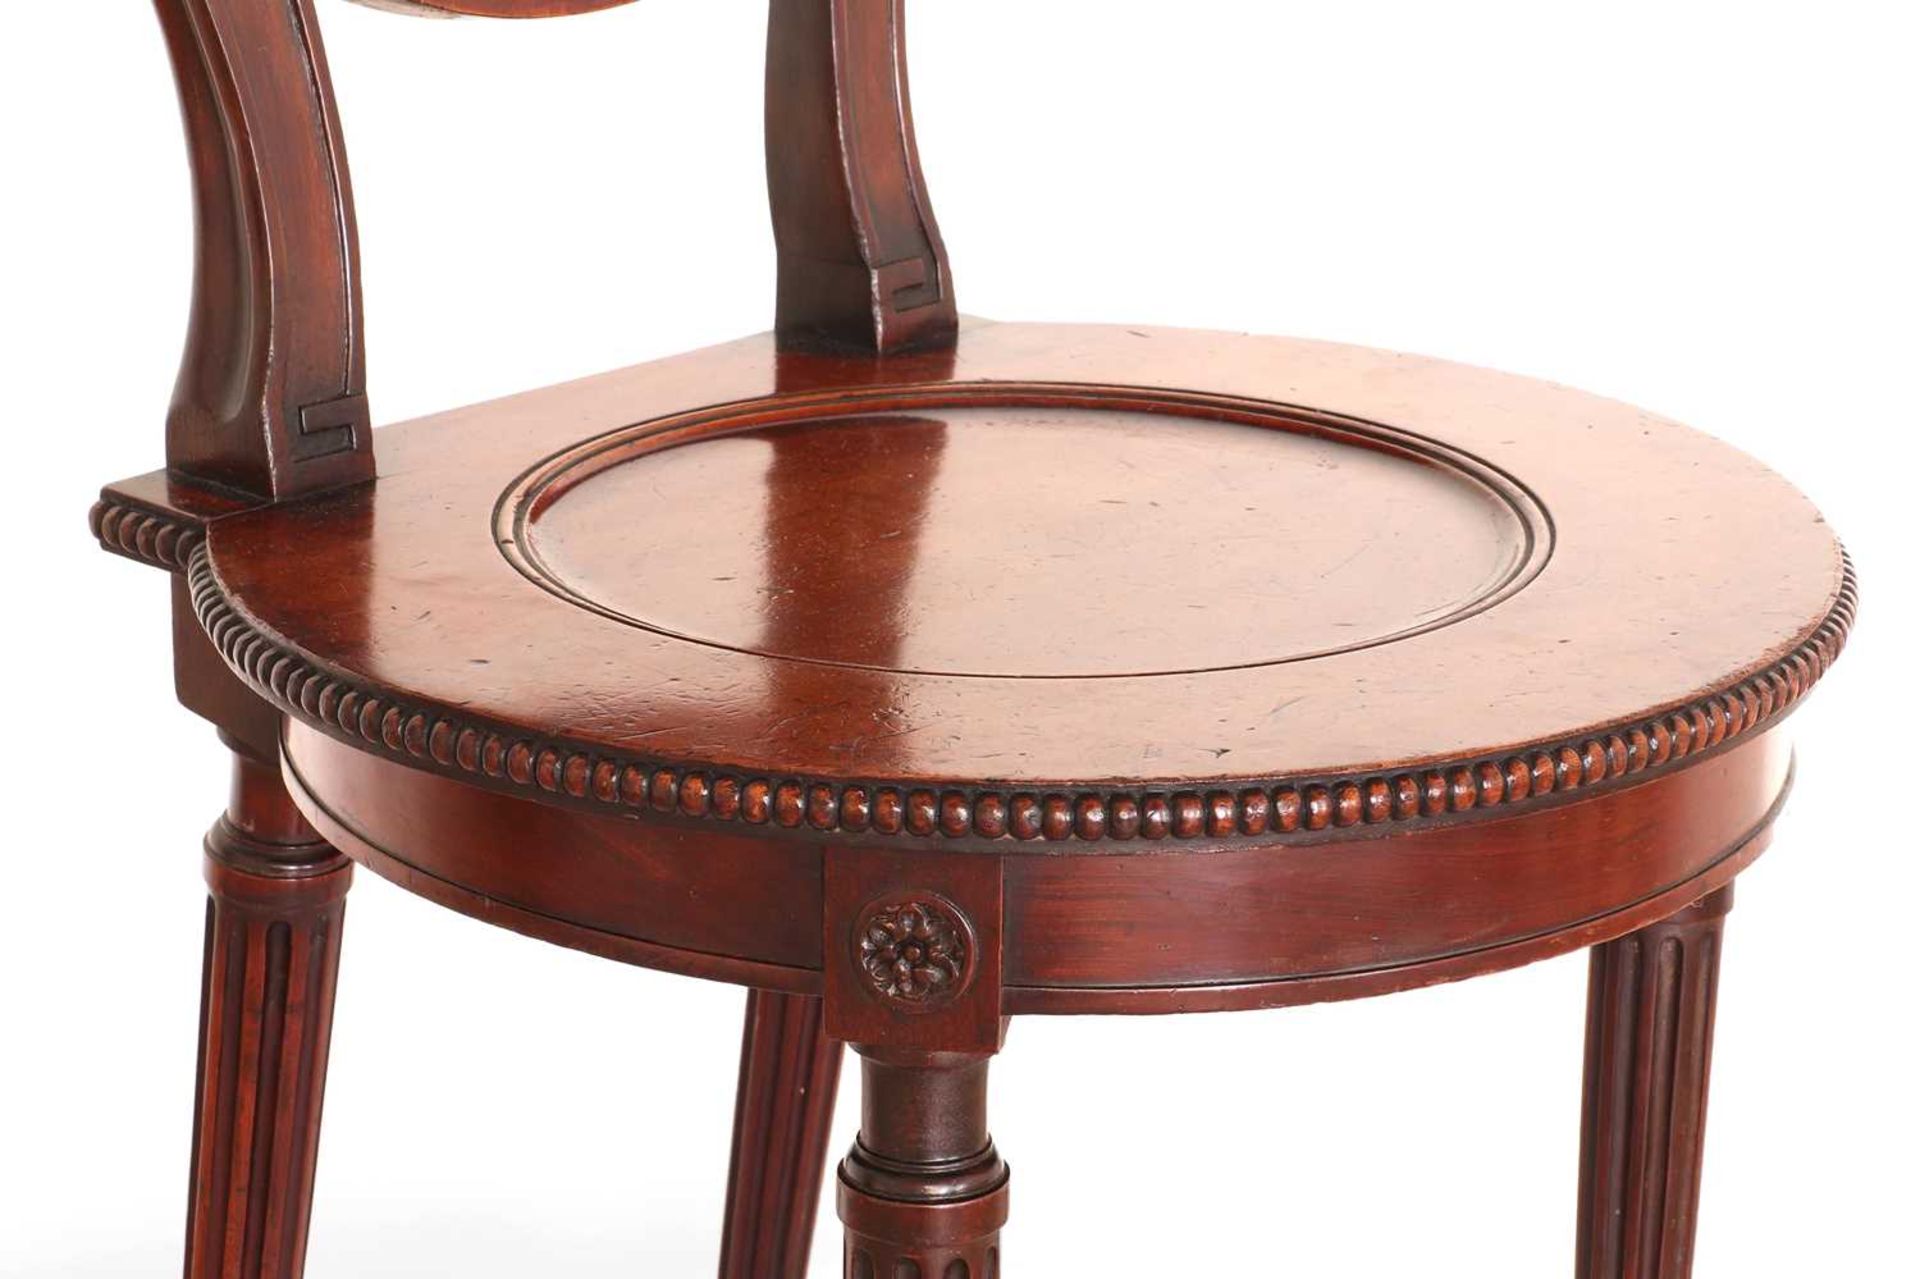 A George III mahogany hall chair by Thomas Chippendale, - Image 10 of 46